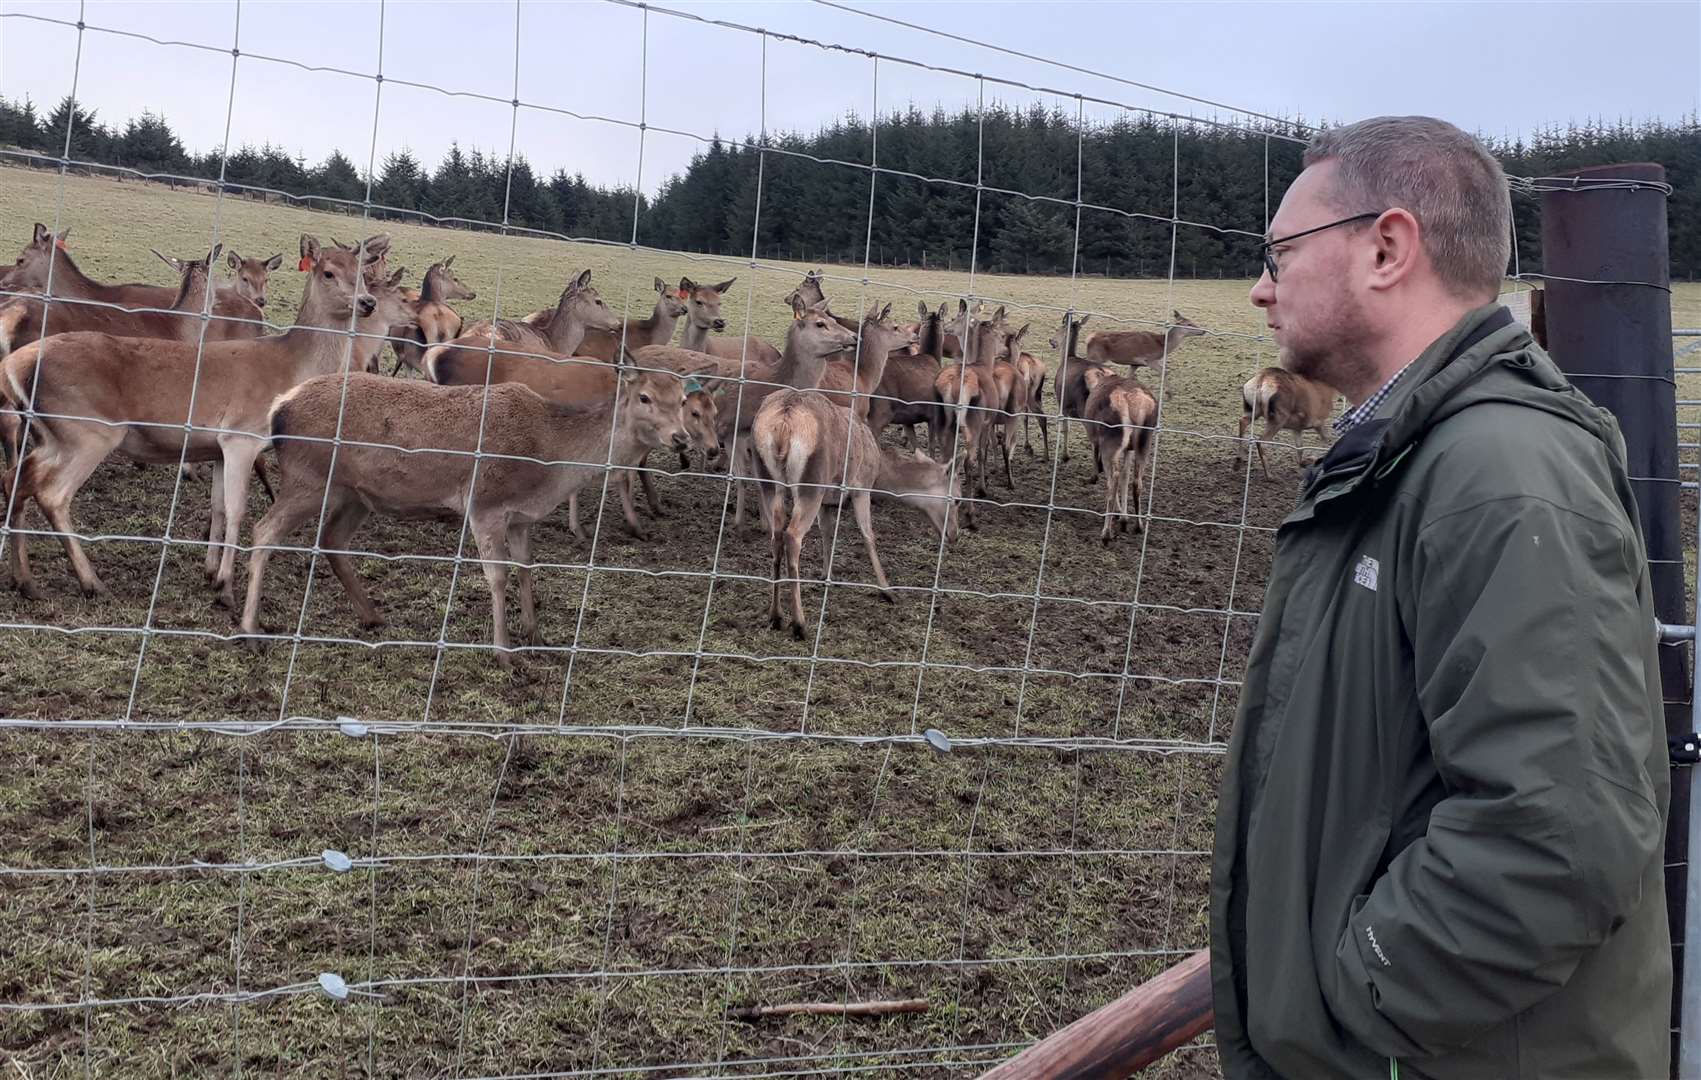 MP Richard Thomson highlighted the issue after a recent visit to a deer farm on Donside in Aberdeenshire.